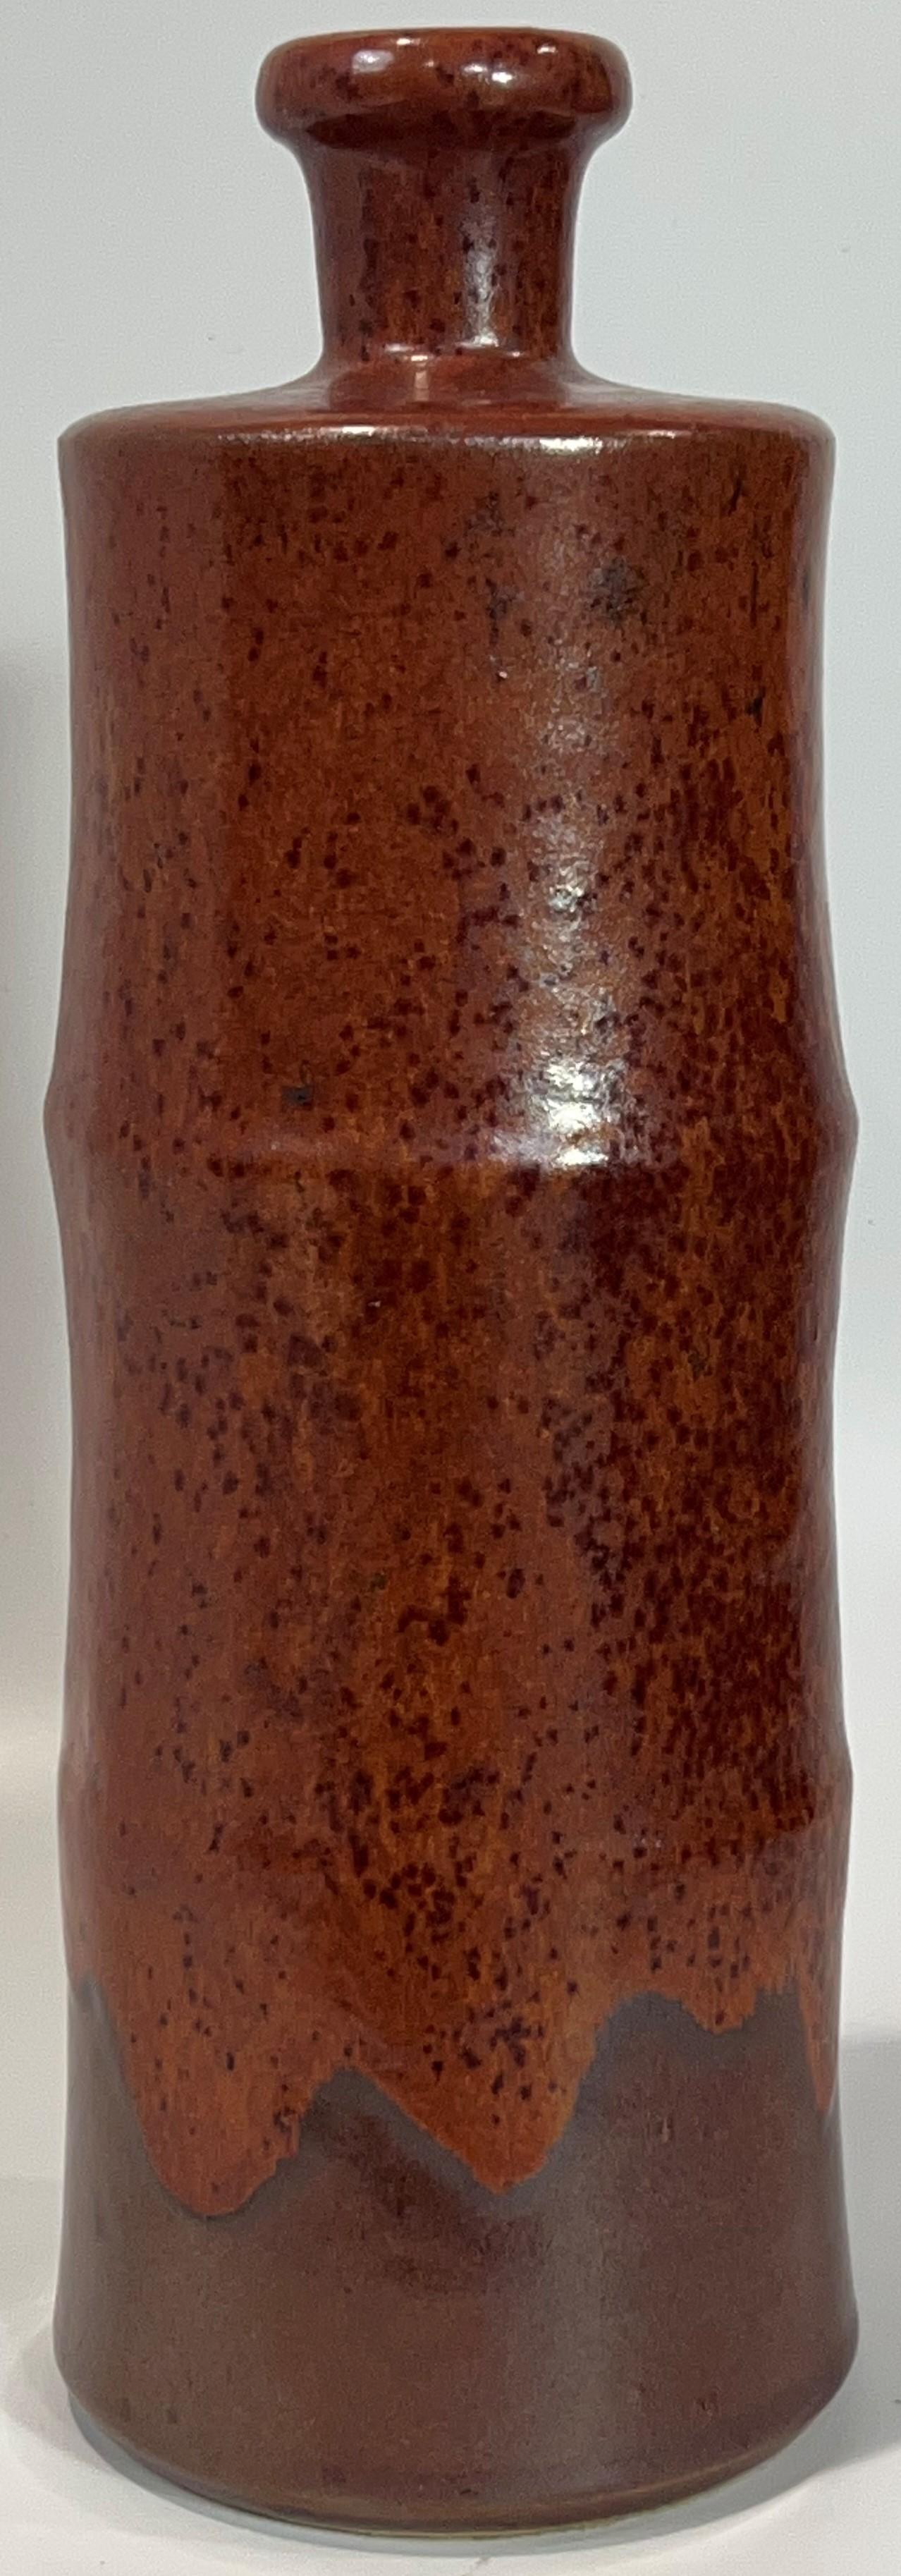 Horst Kerstan three stage large bottle vase. After a period in the 70's focused on experiments with his Anagami kiln, high fired glazes on porcelaneous stoneware embody a third (or fourth) distinct body of work all subtly informed by serious study